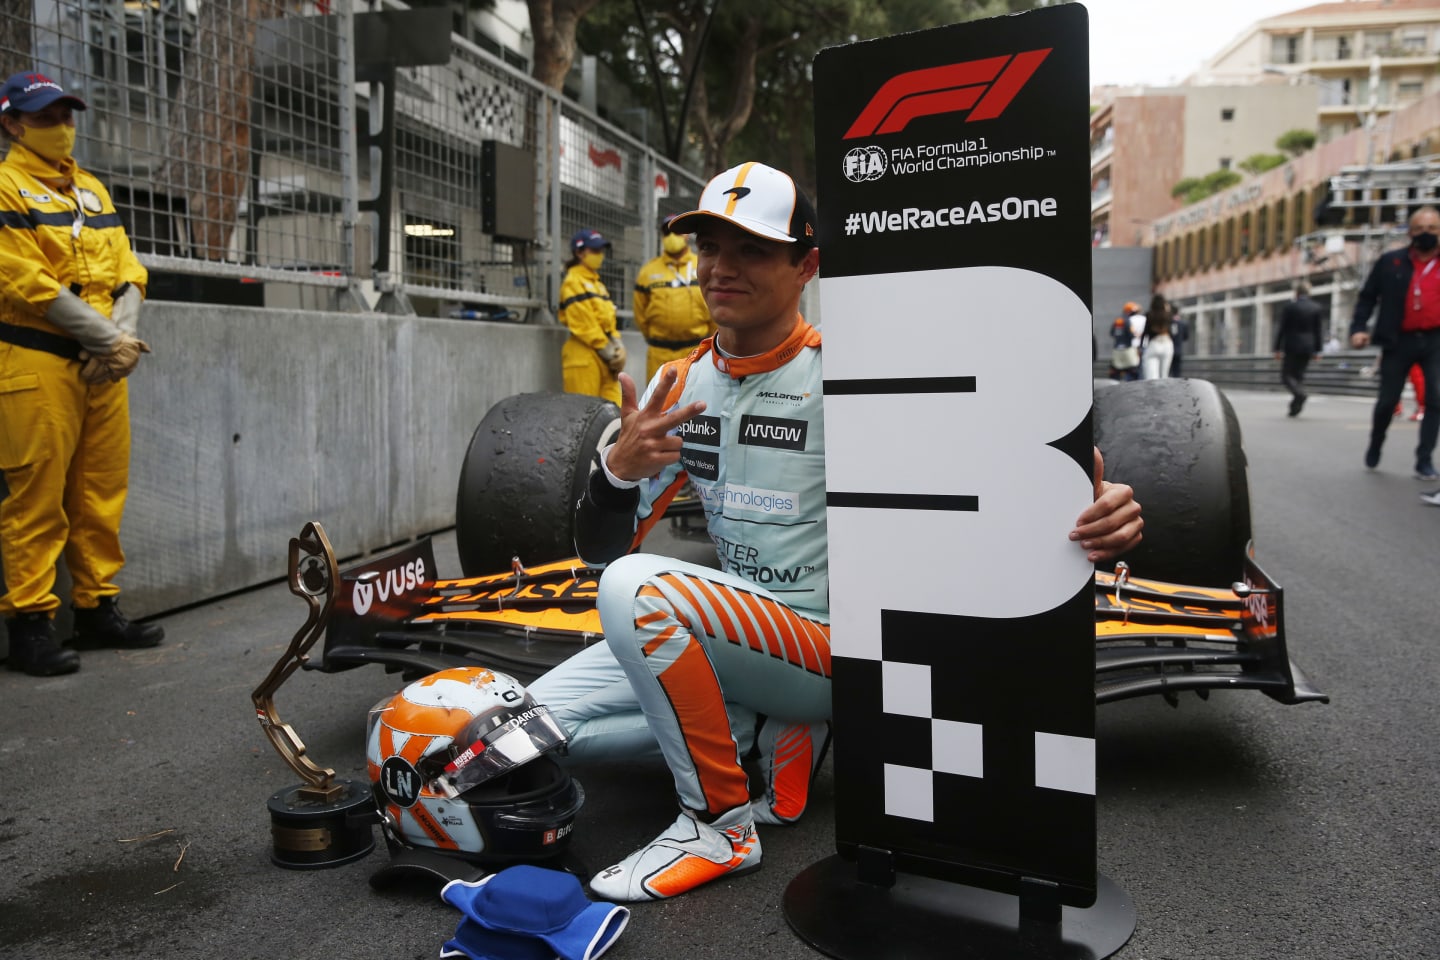 MONTE-CARLO, MONACO - MAY 23: Third placed Lando Norris of Great Britain and McLaren F1 celebrates in parc ferme during the F1 Grand Prix of Monaco at Circuit de Monaco on May 23, 2021 in Monte-Carlo, Monaco. (Photo by Sebastian Nogier - Pool/Getty Images)